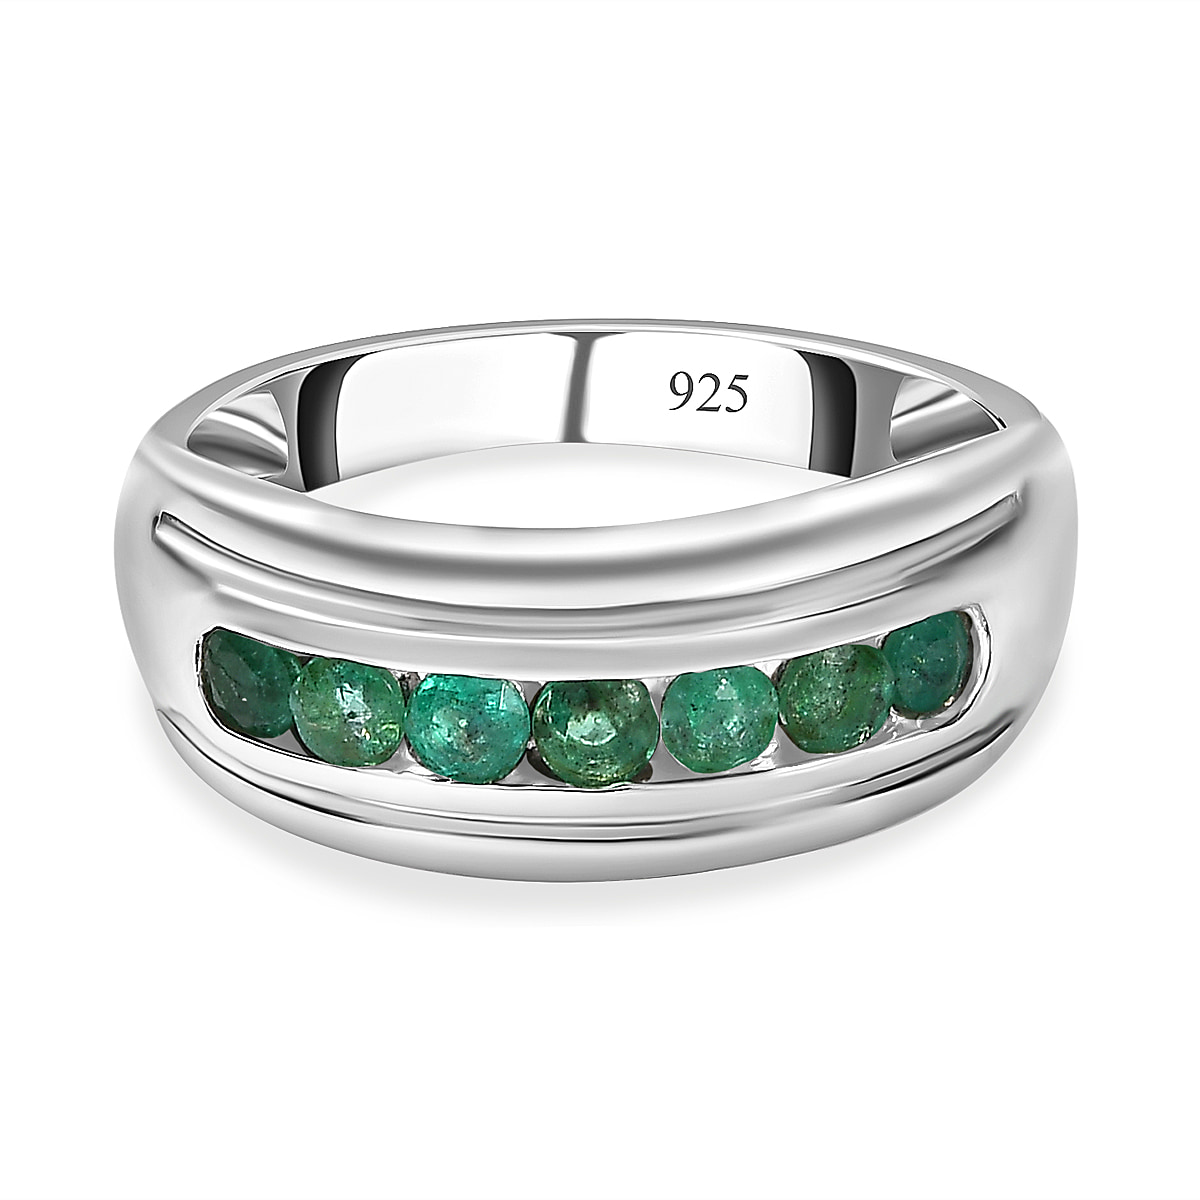 AAA Gemfields Emerald 7 Stone Engagement Ring in Platinum Overlay Sterling Silver